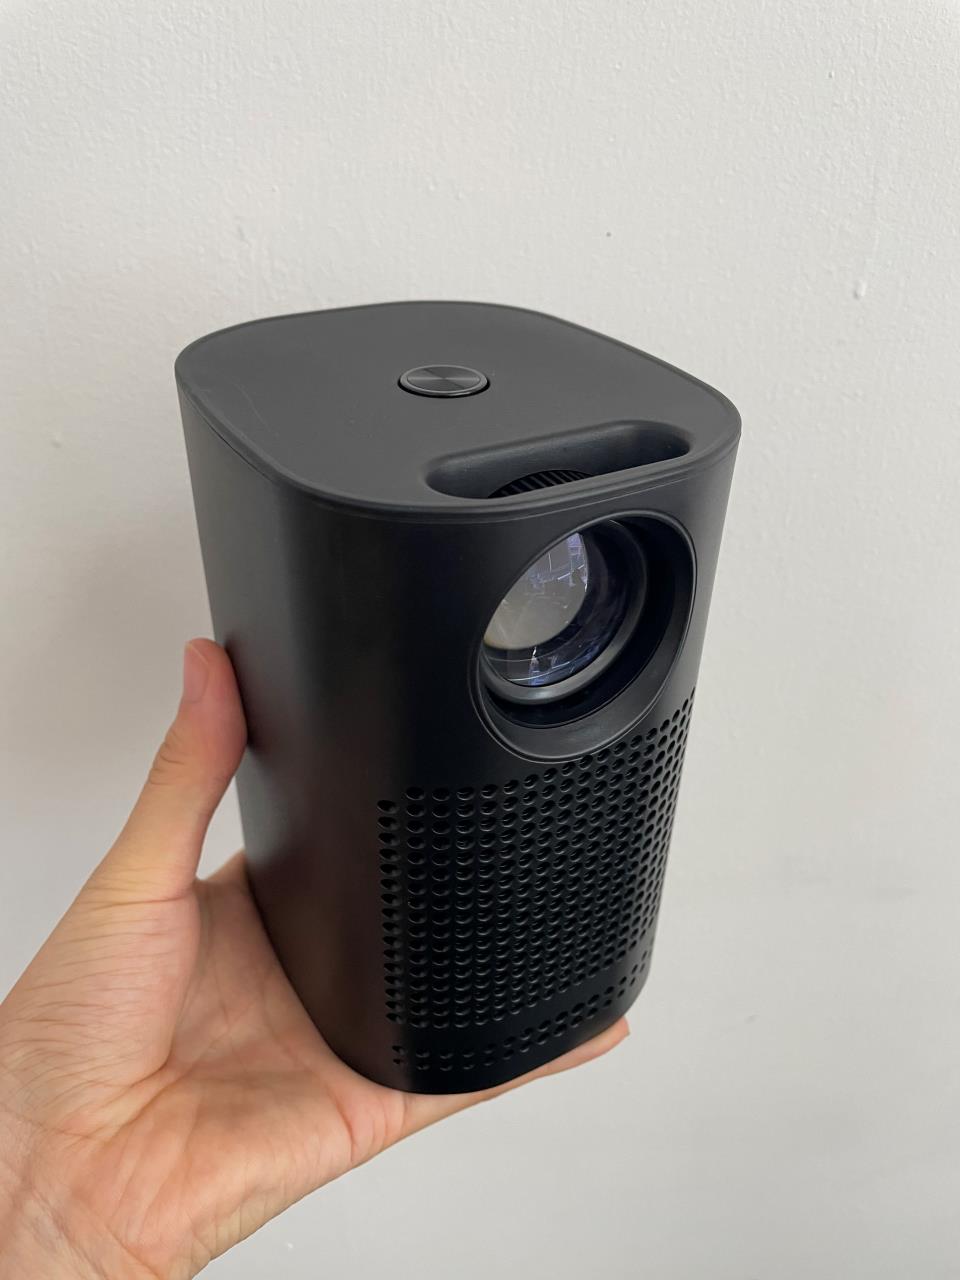 ePP-Y6 Capsule, Mini Projector, Black, 100 ANSI Lumen Portable Projector, 360° Speaker, Movie Projector, 100 Inch Picture, 4-Hour Video Playtime, Neat Projector, Home Entertainment Sold 20,000+ worldwide